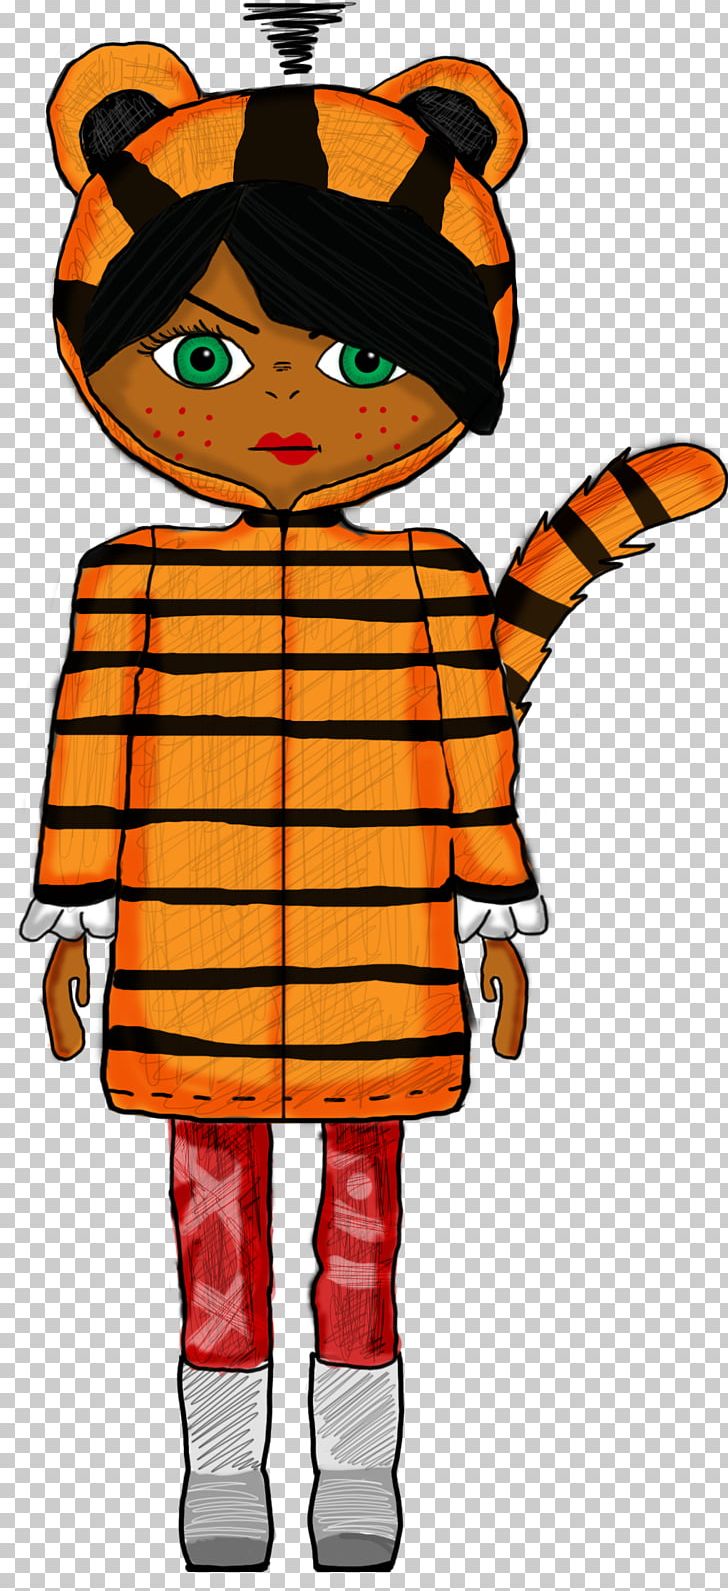 Headgear Mascot Toddler PNG, Clipart, Angry Tiger, Art, Character, Clothing, Costume Design Free PNG Download